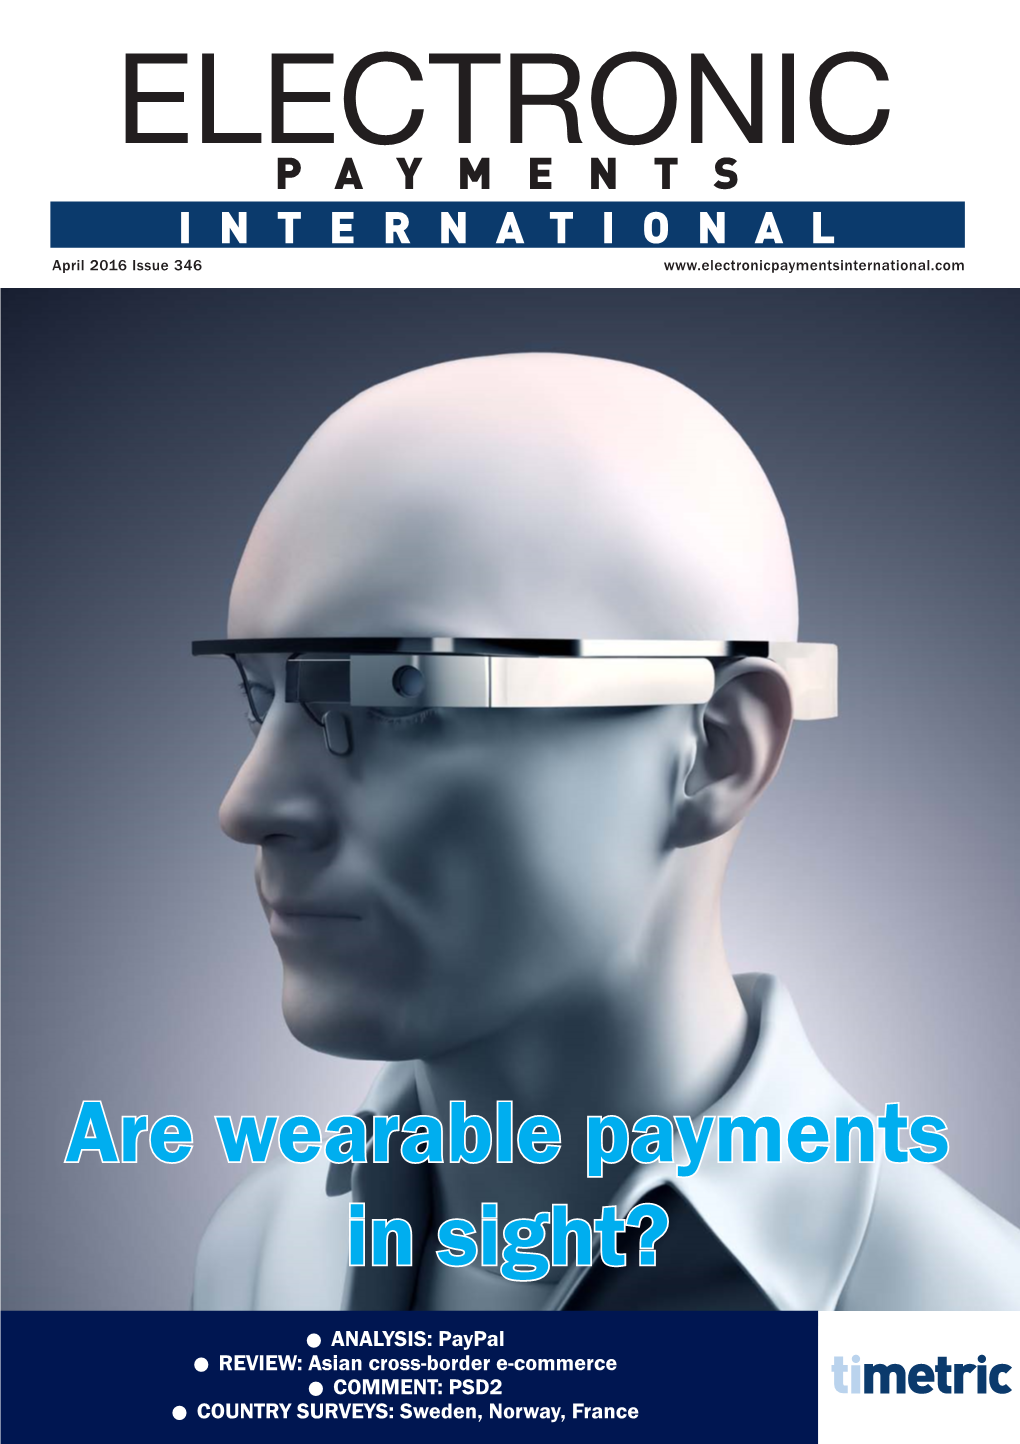 Are Wearable Payments in Sight? •ANALYSIS: Paypal •REVIEW: Asian Cross-Border E-Commerce •COMMENT: PSD2 •COUNTRY SURVEYS: Sweden, Norway, France